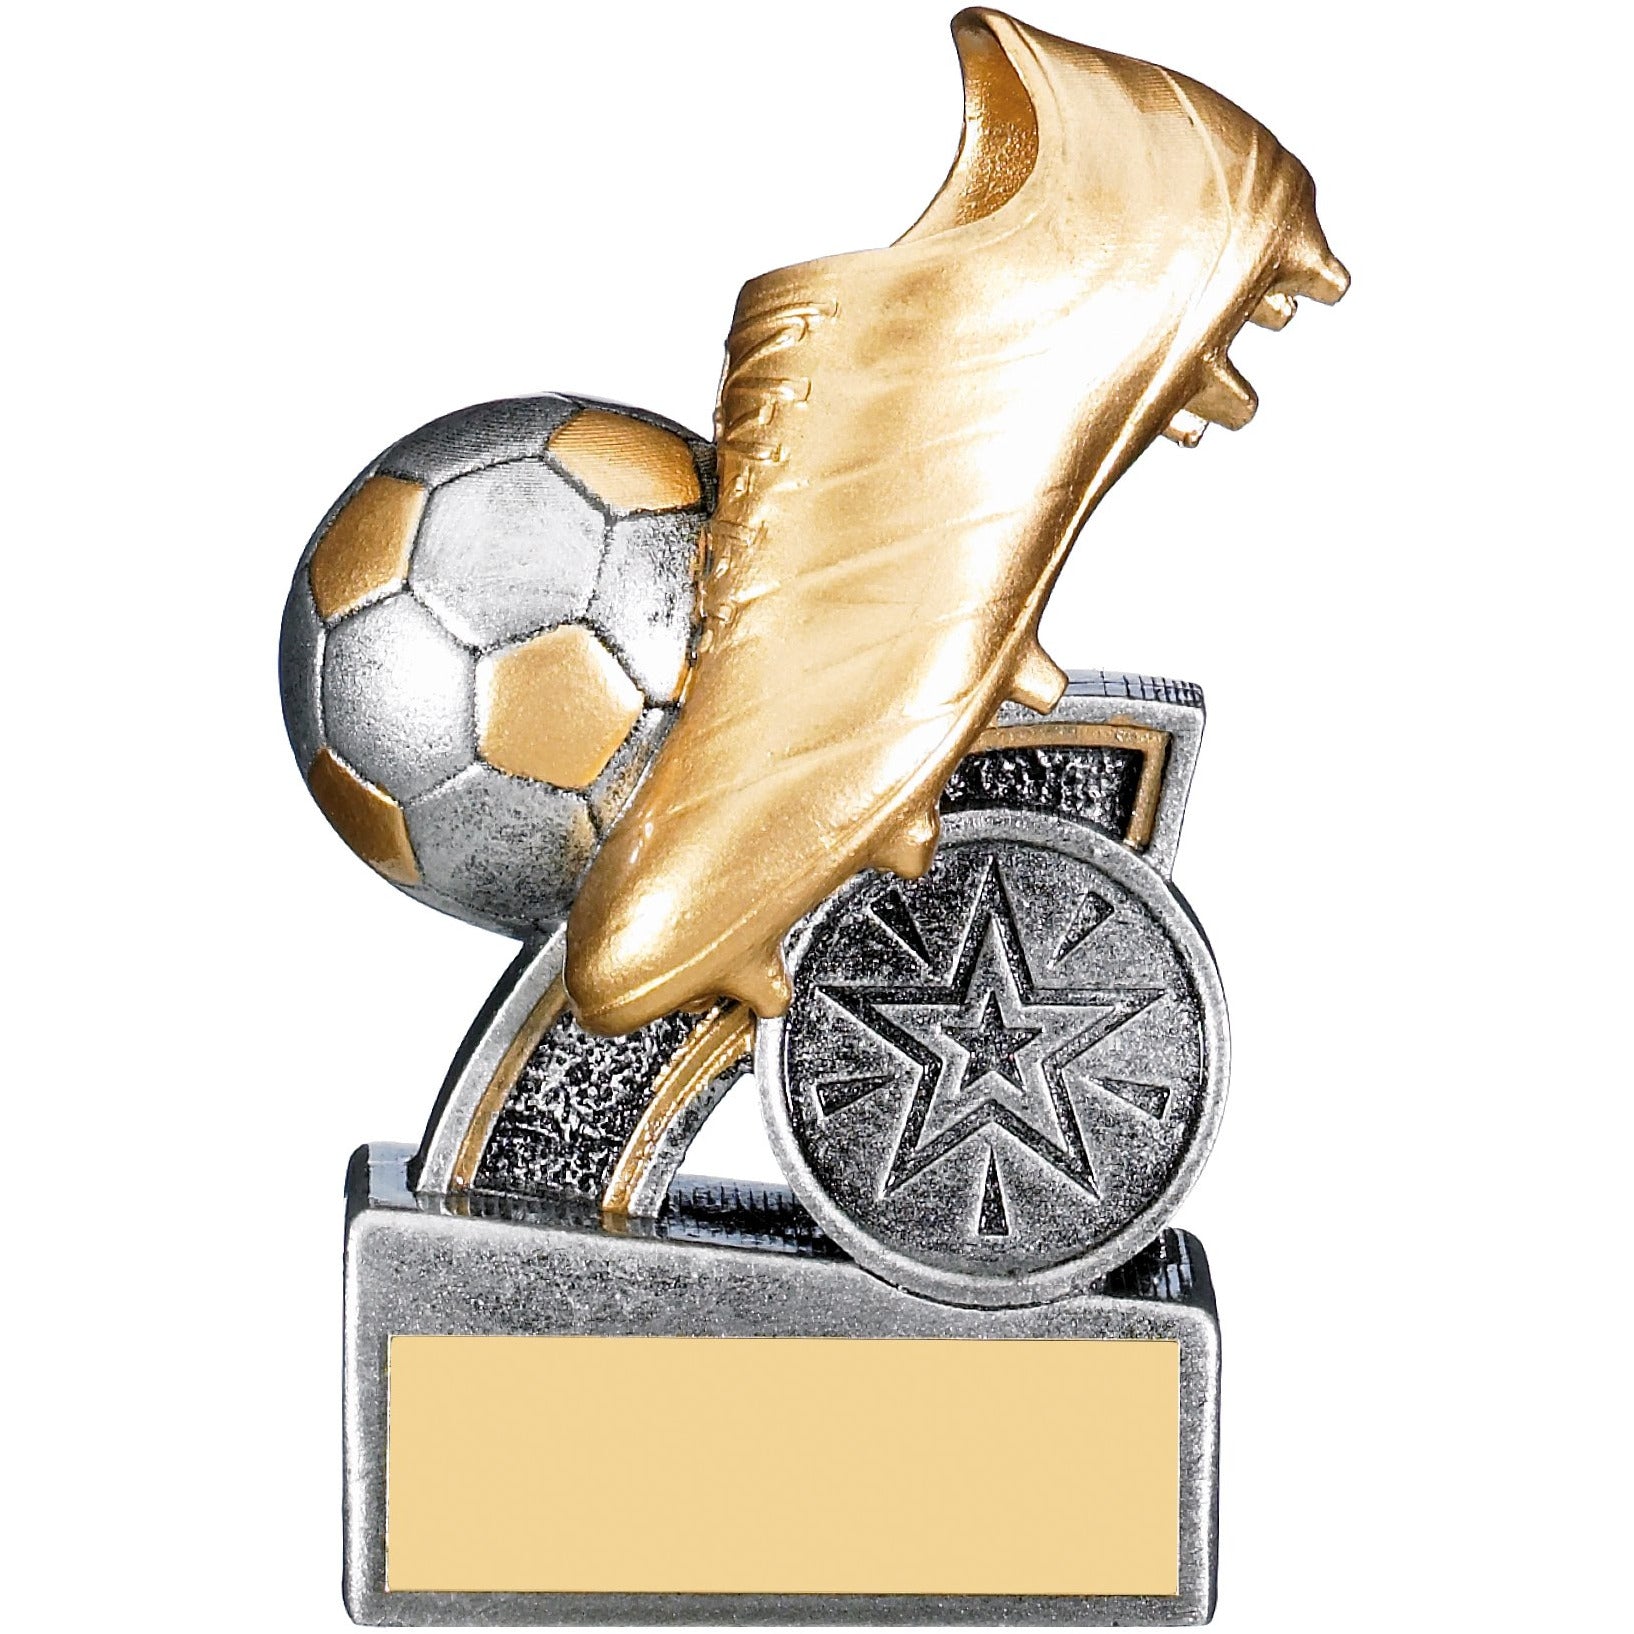 Halo Football Boot & Ball Trophy (Gold/Silver)